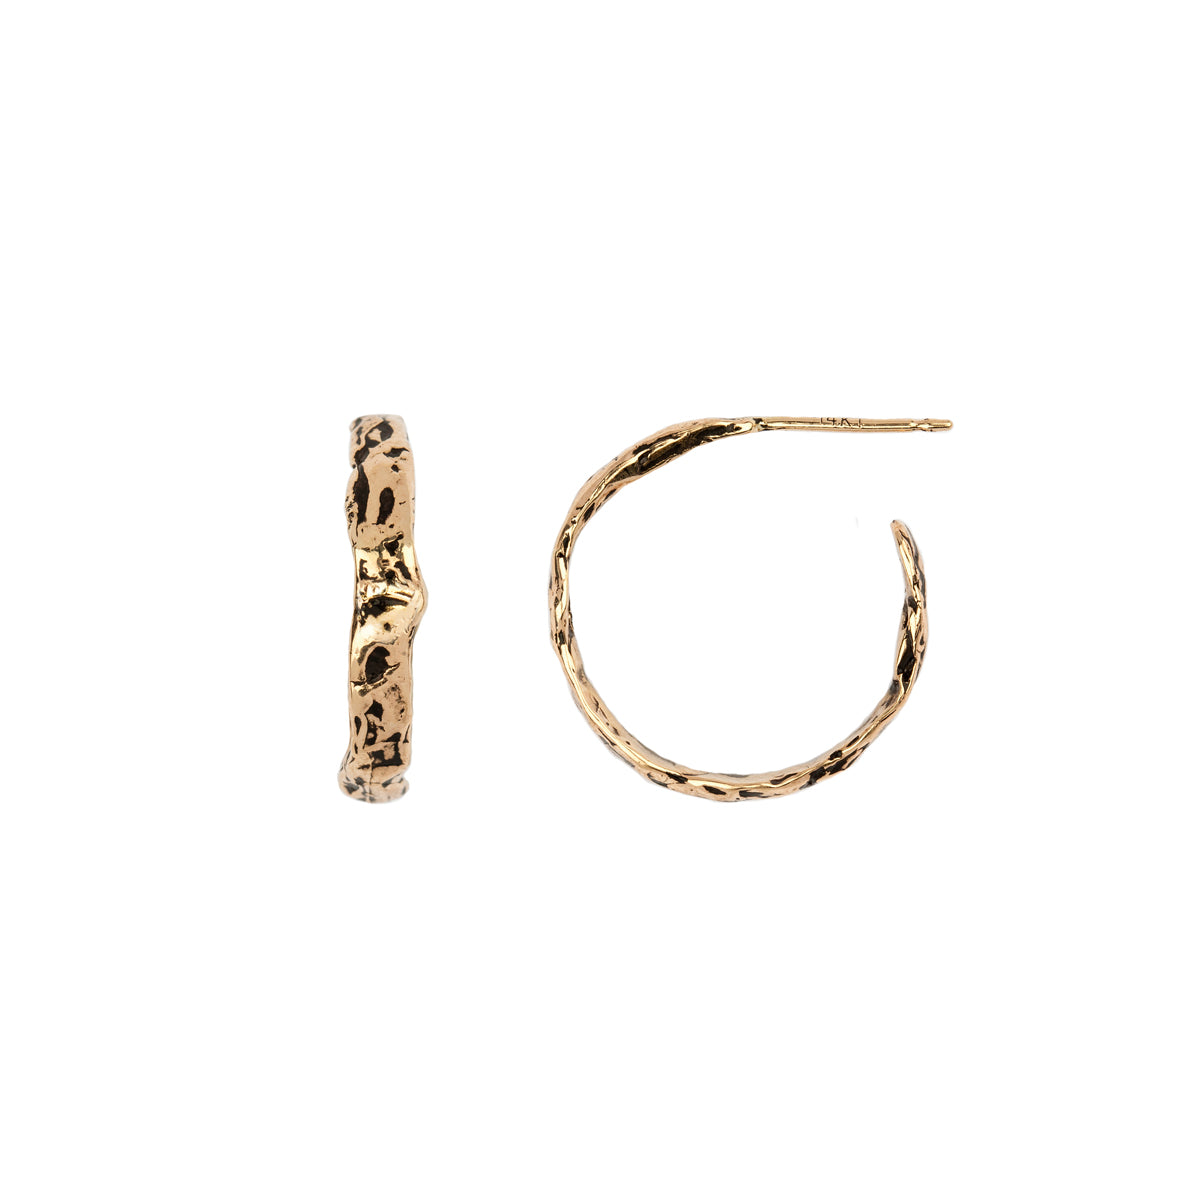 Small 14K Gold Textured Hoops